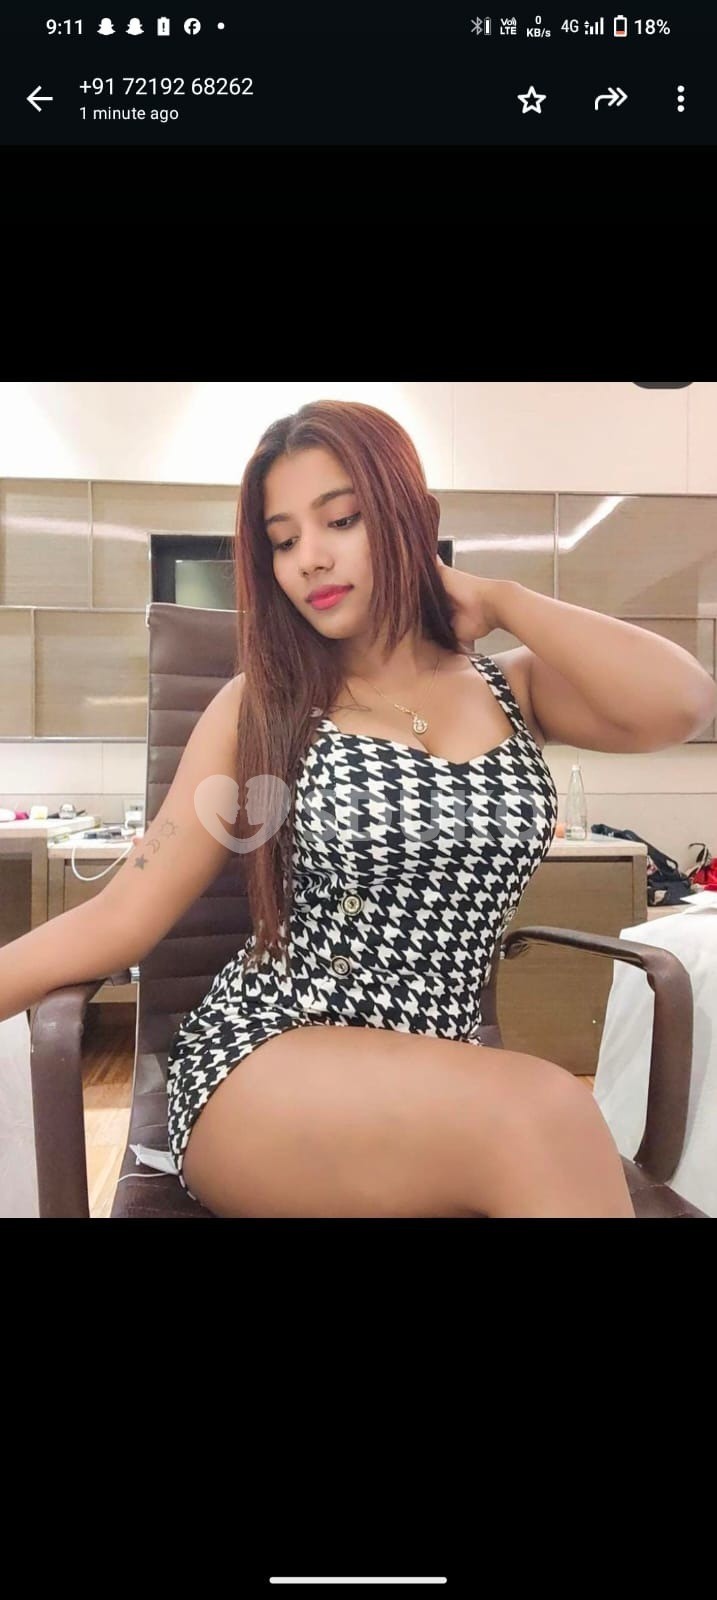 ROHINI .🆑 BEST CALL GIRL INDEPENDENT ESCORT SERVICE IN LOW BUDGET